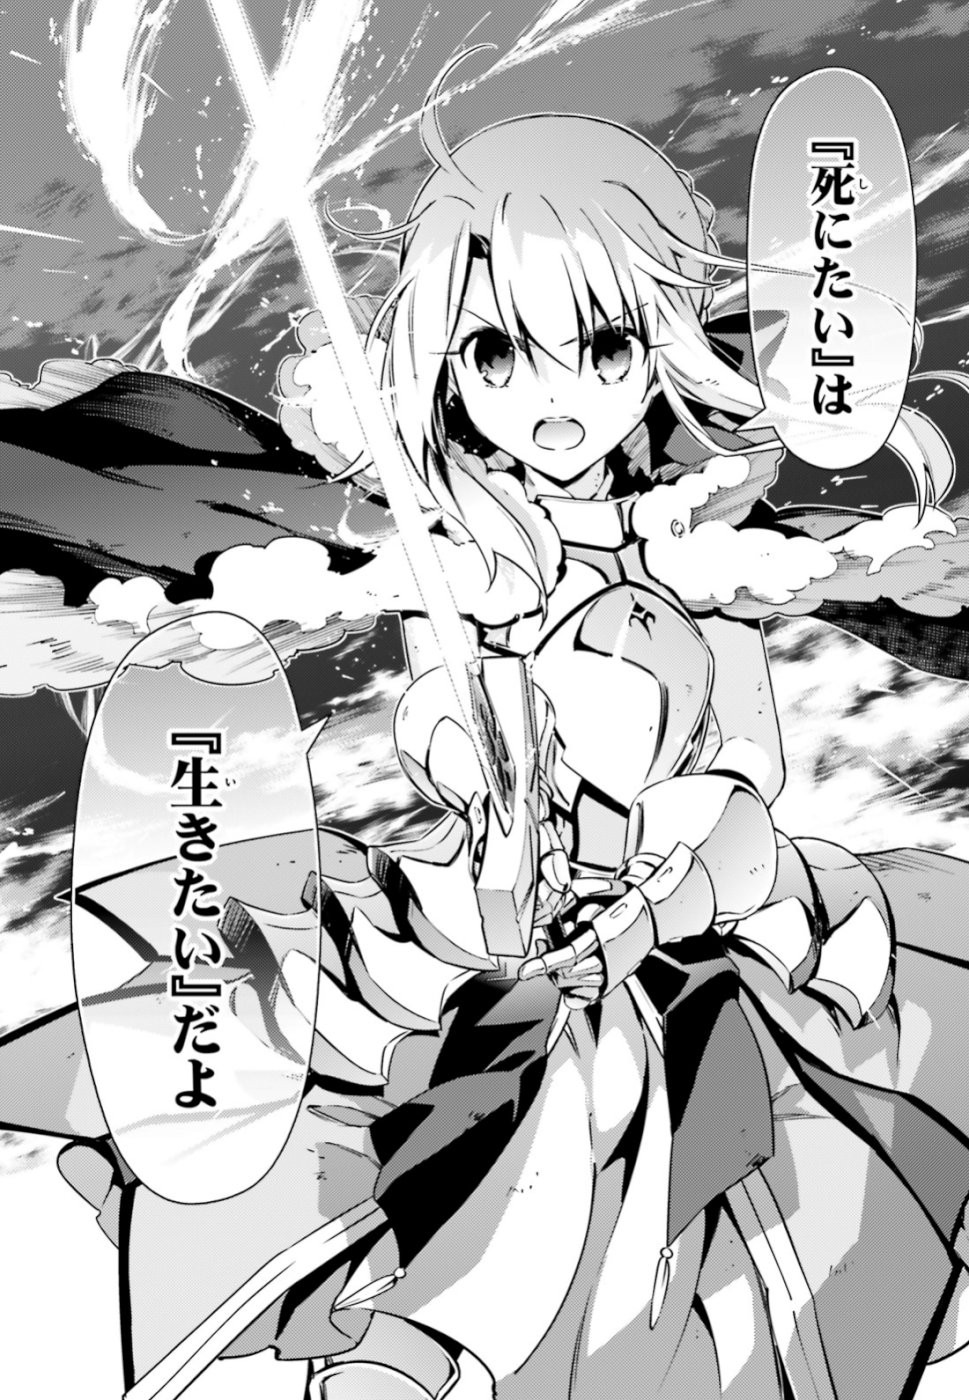 Fate/Kaleid Liner Prisma Illya Drei! - Chapter 55-3 - Page 9